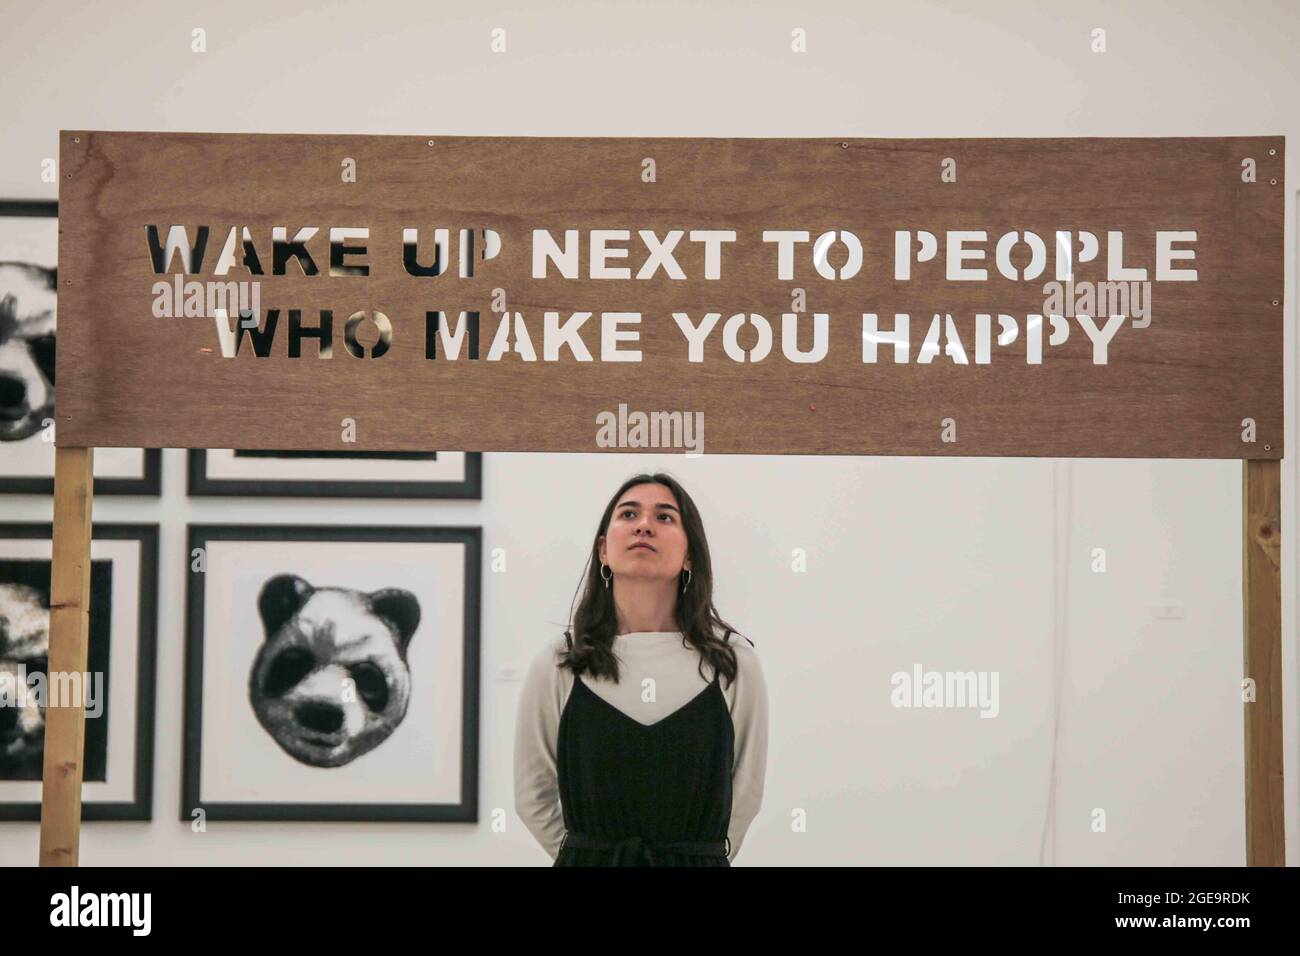 London UK 18 August 2021 RIGHT HERE RIGHT NOW. Wake up next to the people who makes you happy, 2021 . The 4,000 sq. ft exhibition will open in two gallery spaces at Saatchi Gallery on Thursday, 19 August 2021 until 9 September 2021.The exhibition features artworks by established artists such as Jake & Dinos Chapman, Charming Baker, David Shrigley and Chris Levine together with works by London based painter Matt Small and mural & installation artist Morag Myerscough. The show will also include previously unseen original work by Gary Stranger, Jessica Albarn, Eelus, Sara Pope and an exciting new Stock Photo